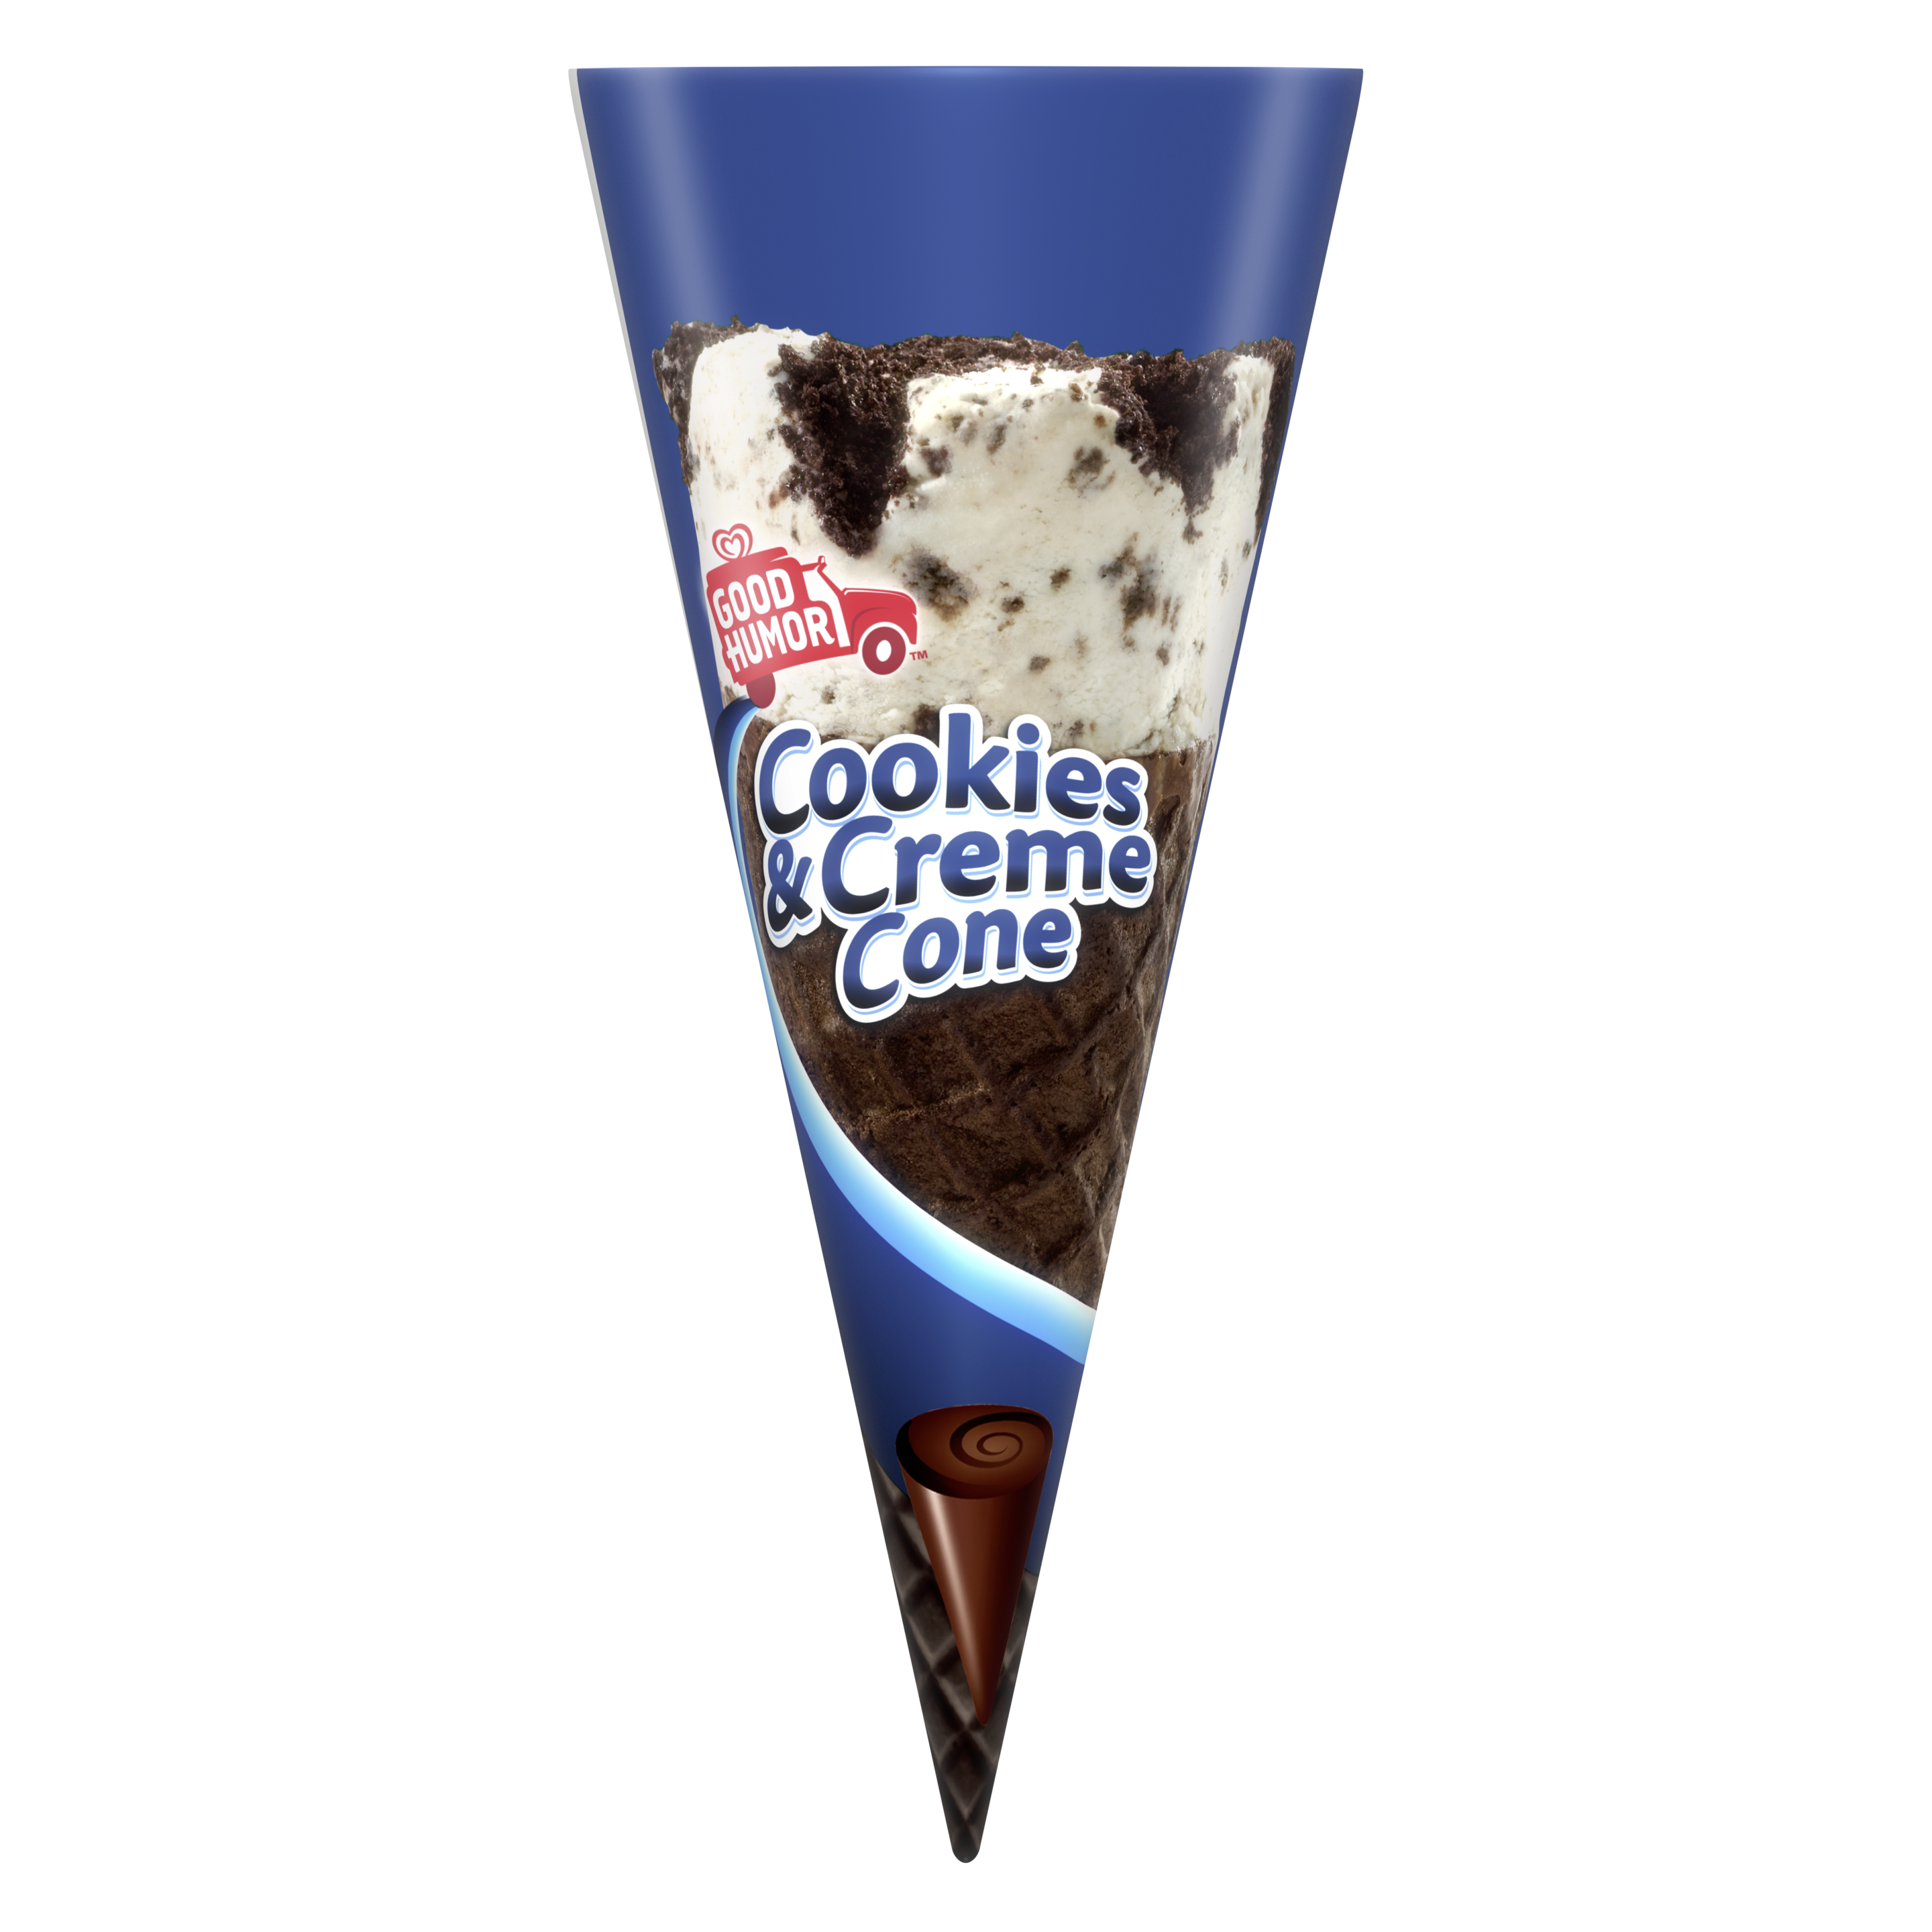 Giant Cookies & Creme Cone